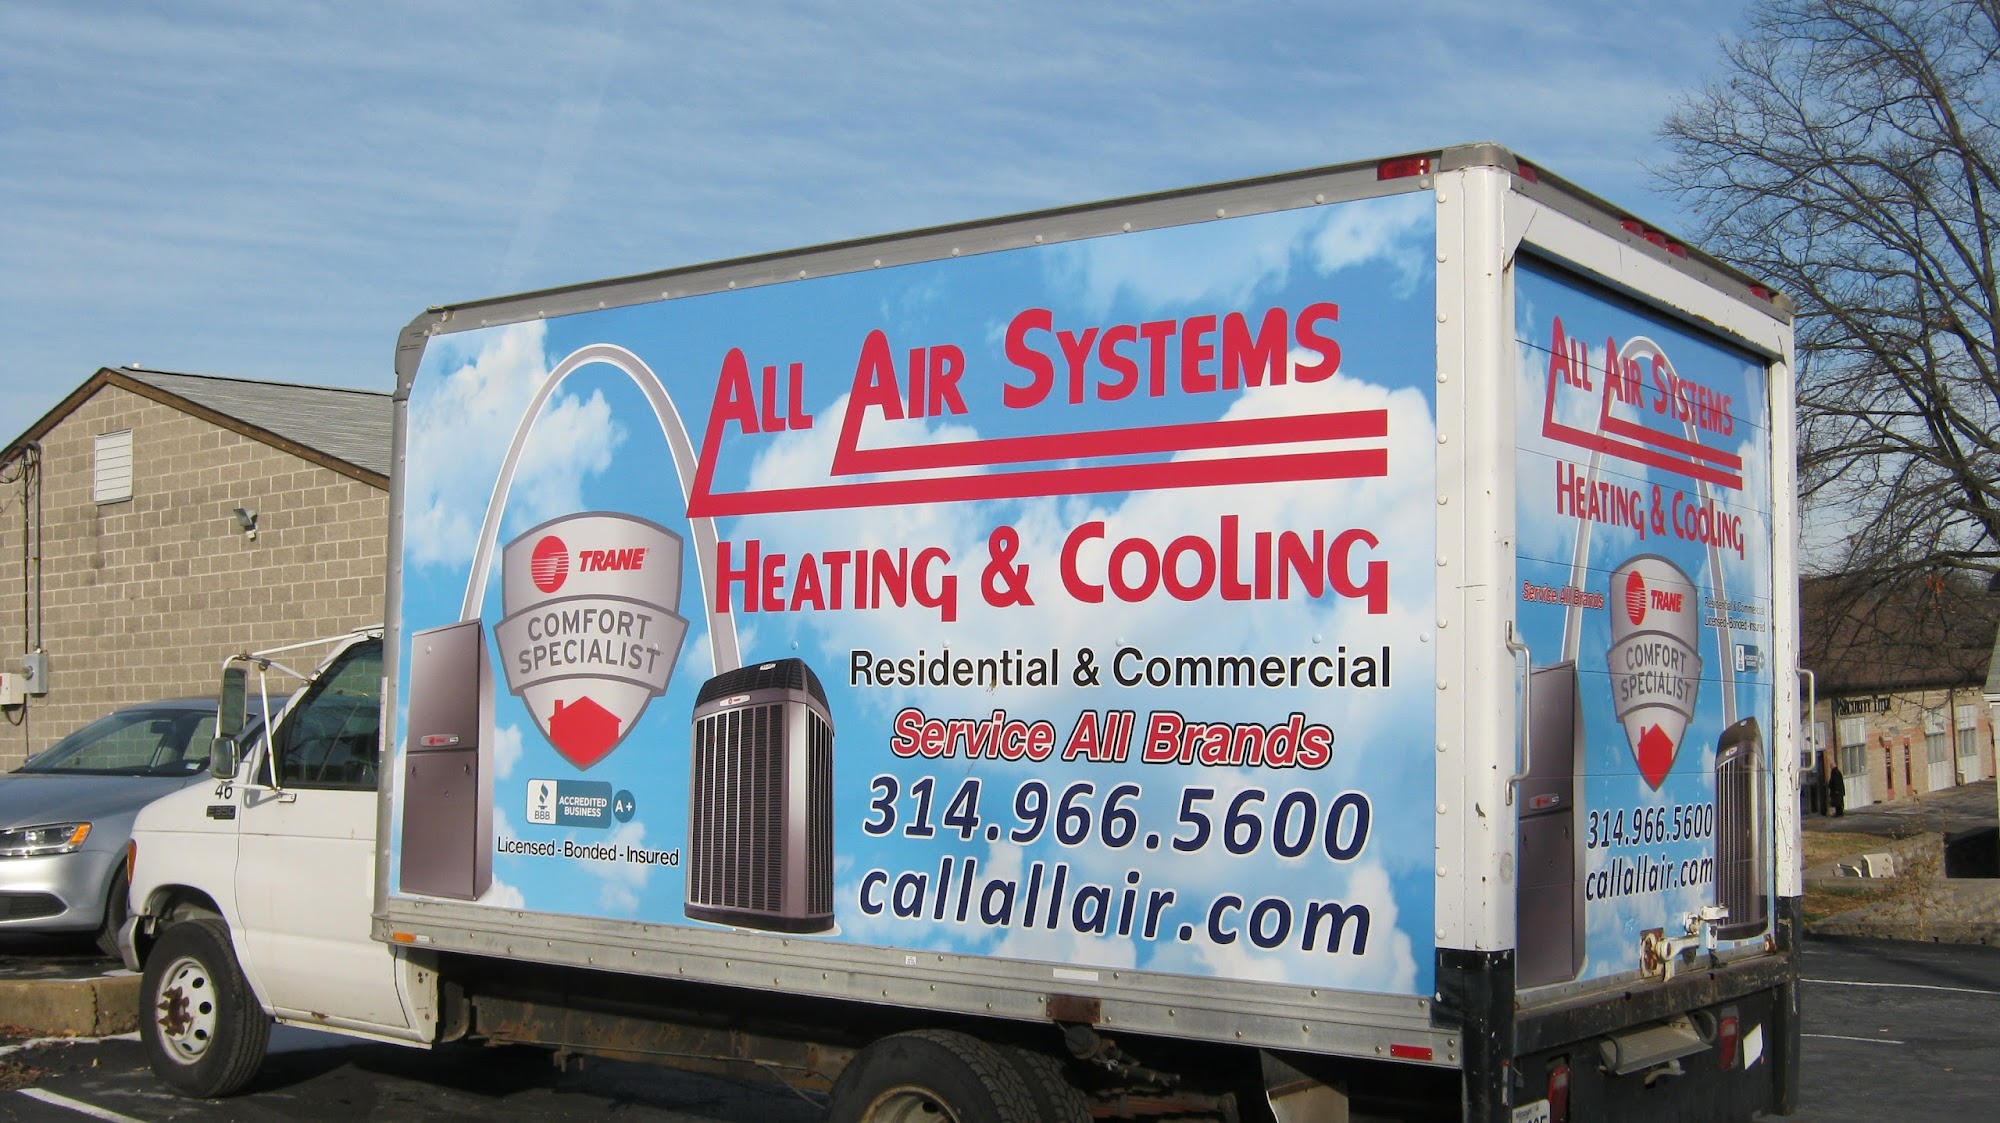 All Air Systems Heating & Cooling